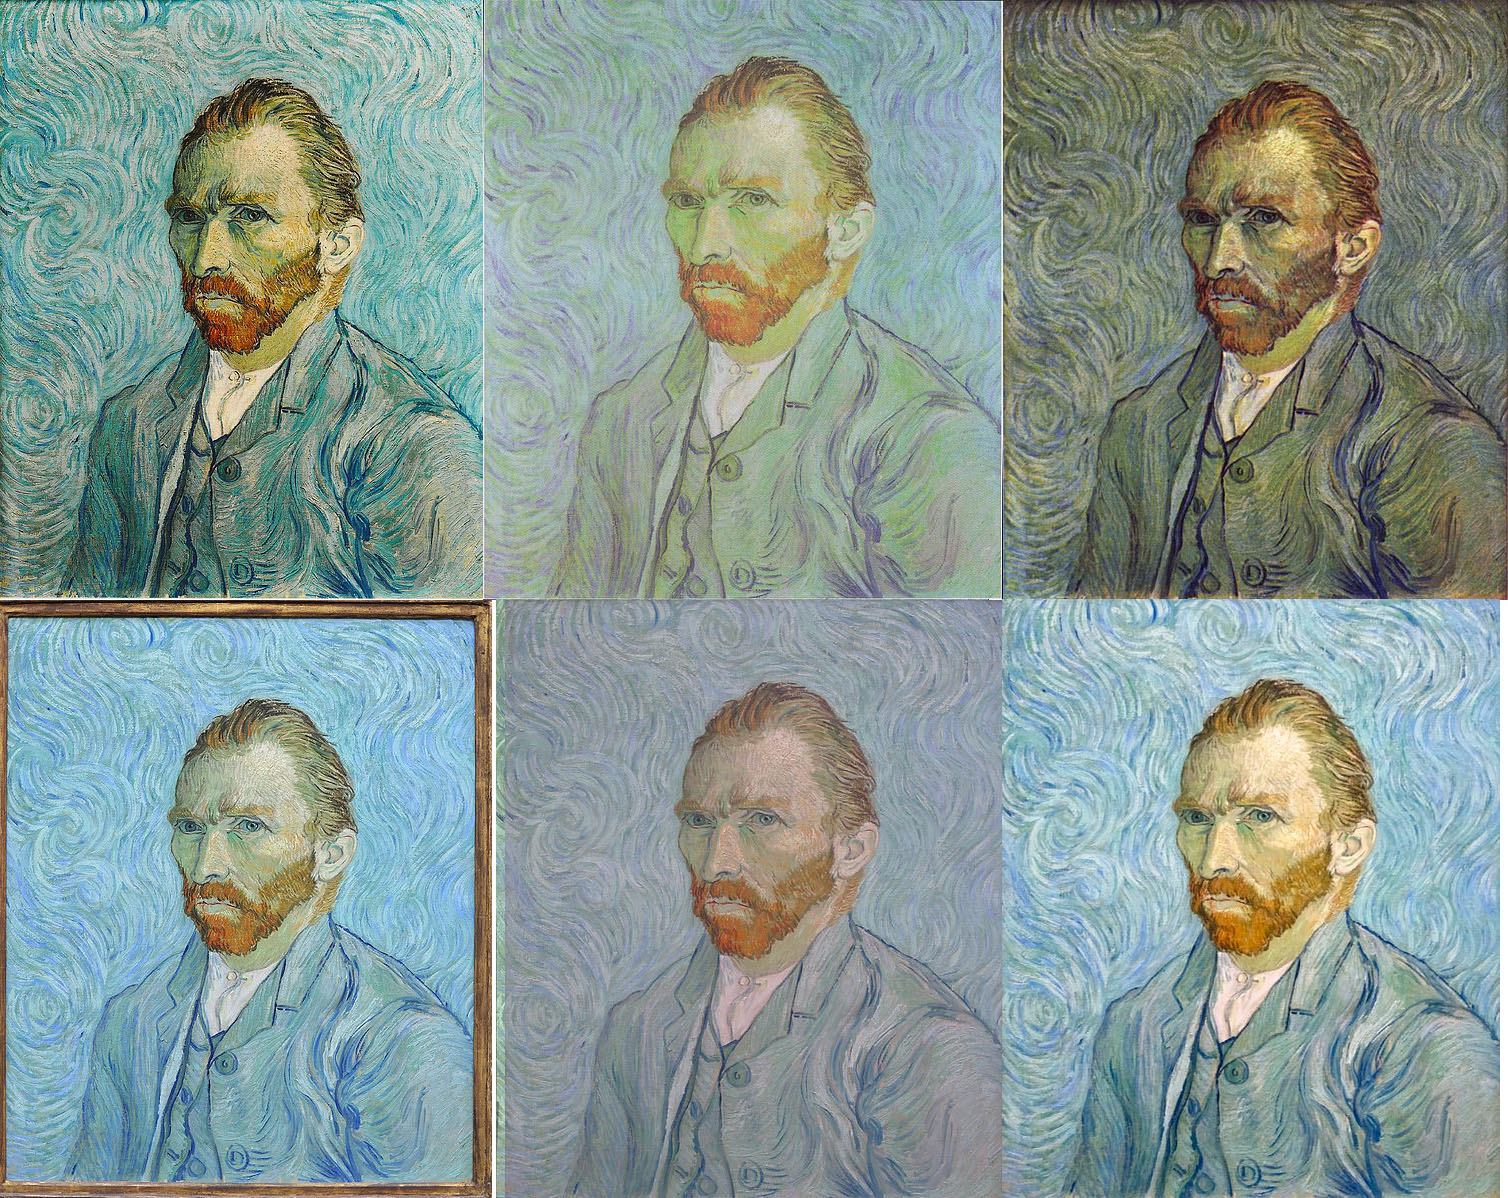 Six different versions of Self Portrait by Van Gogh appear, each with slight differences in color and saturation.